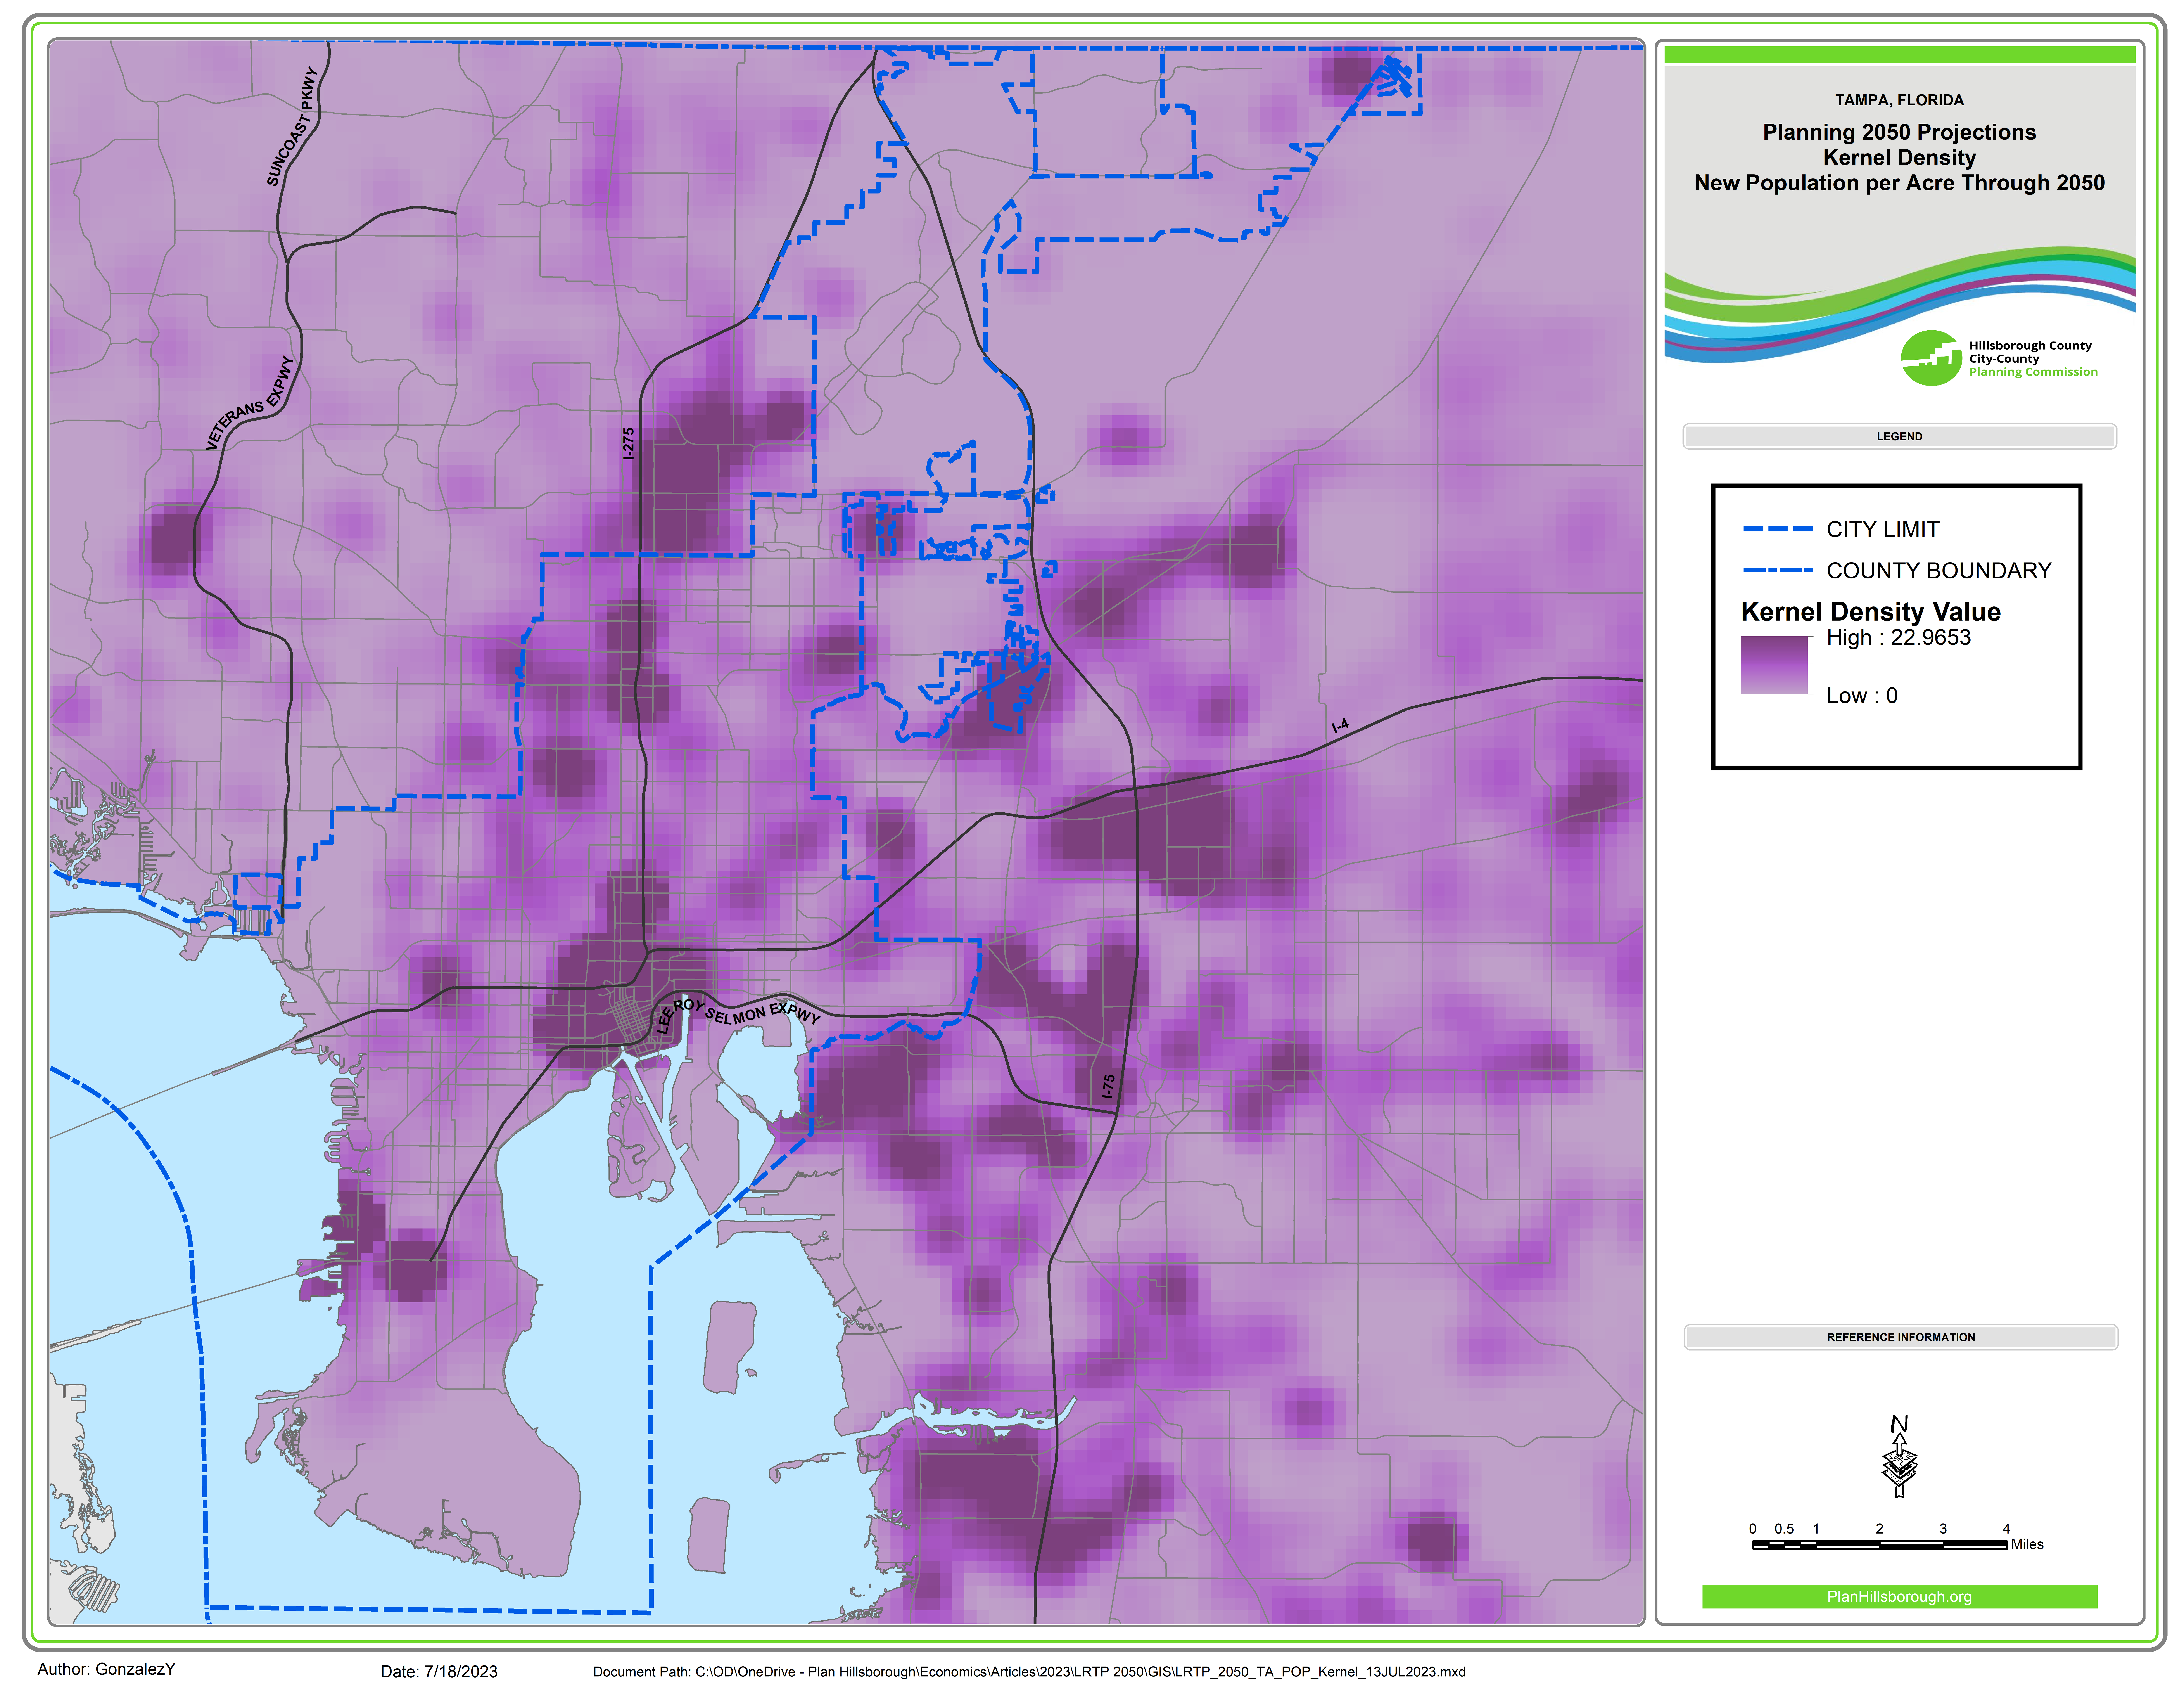 This map shows kernel density for new persons per acre through 2050 for the City of Tampa. Most newcomers are expected to move to darker purple areas like Downtown Tampa and North Tampa.